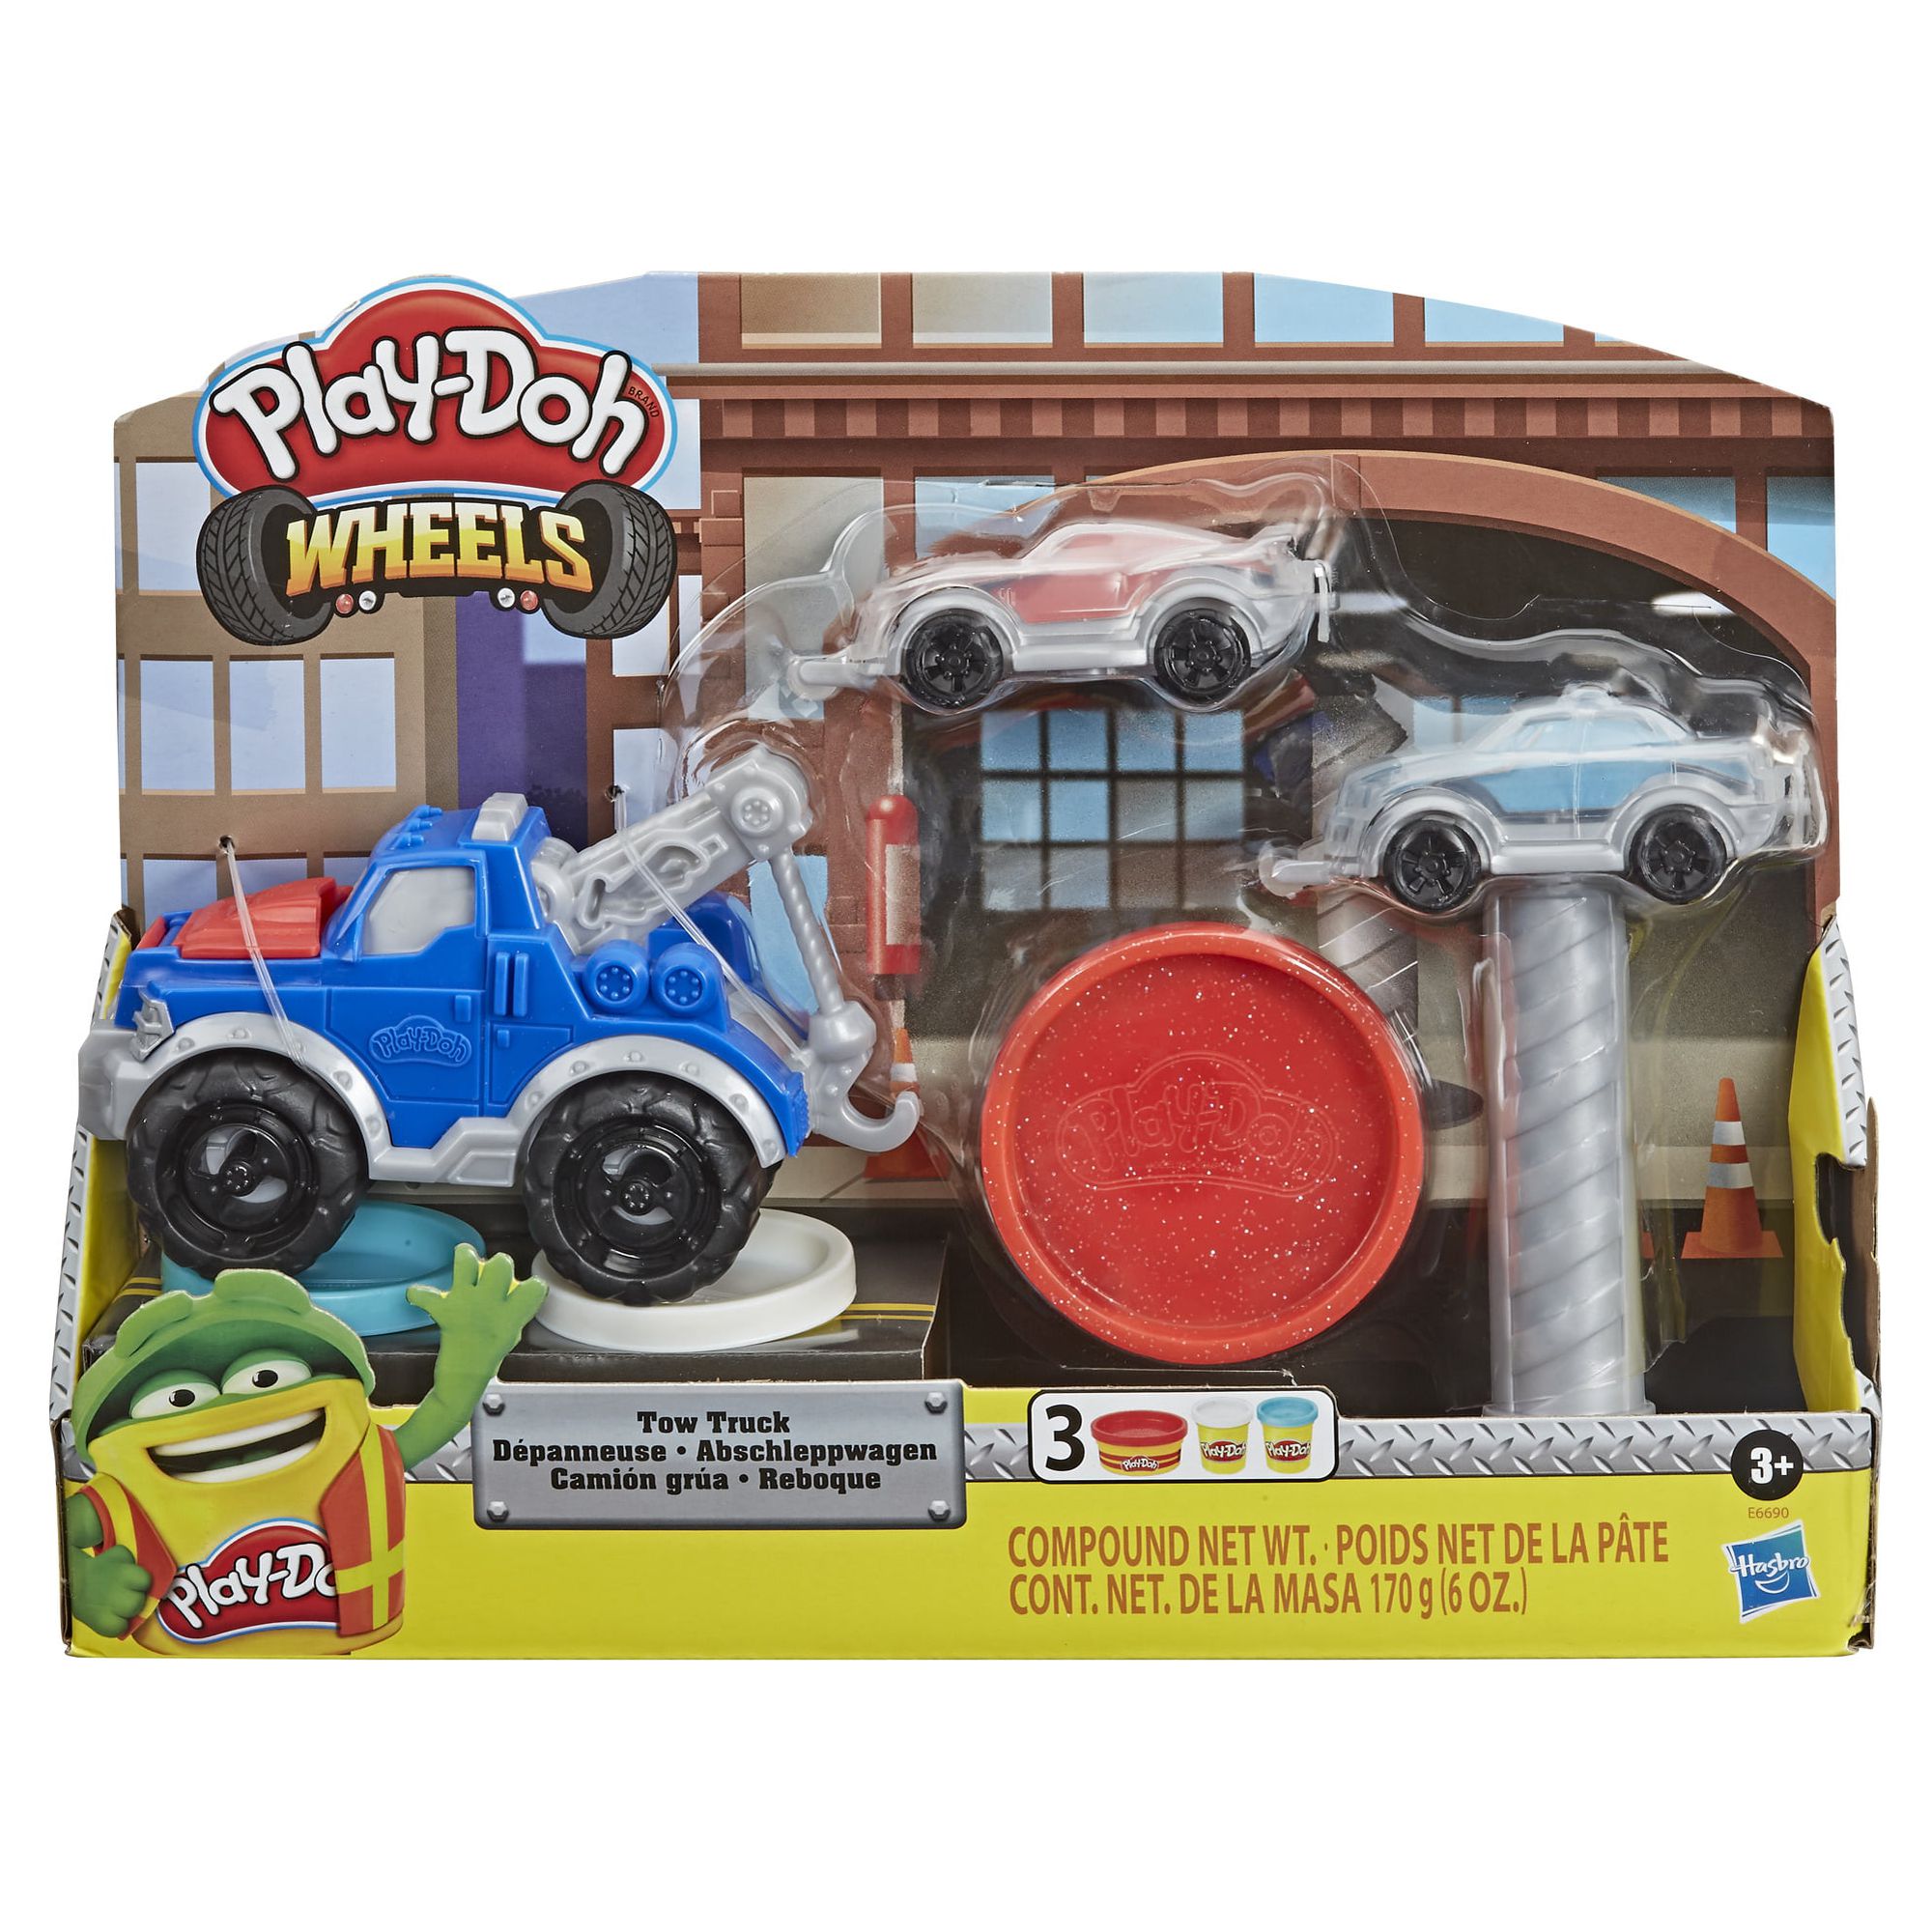 Play-Doh Wheels Tow Truck Toy with 3 Non-Toxic Play-Doh Colors, (6 oz) - image 3 of 14